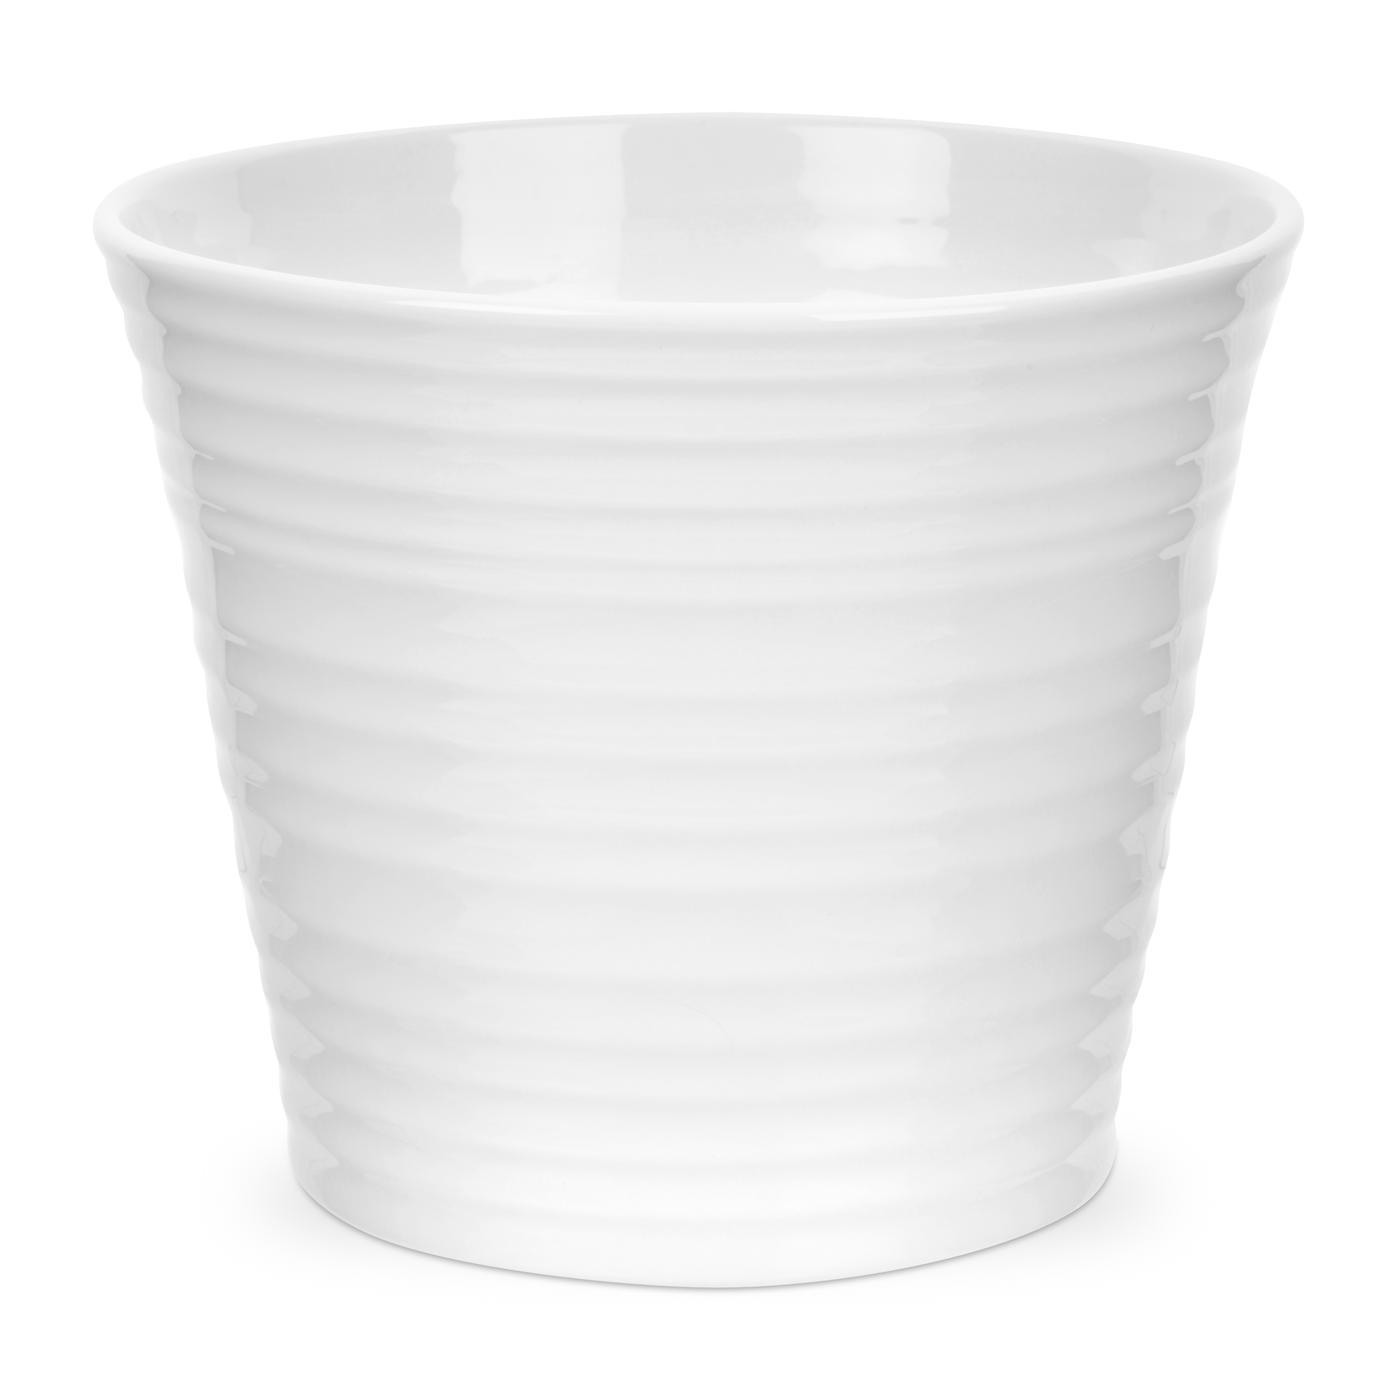 Sophie Conran White 7 Inch Flower Pot image number null